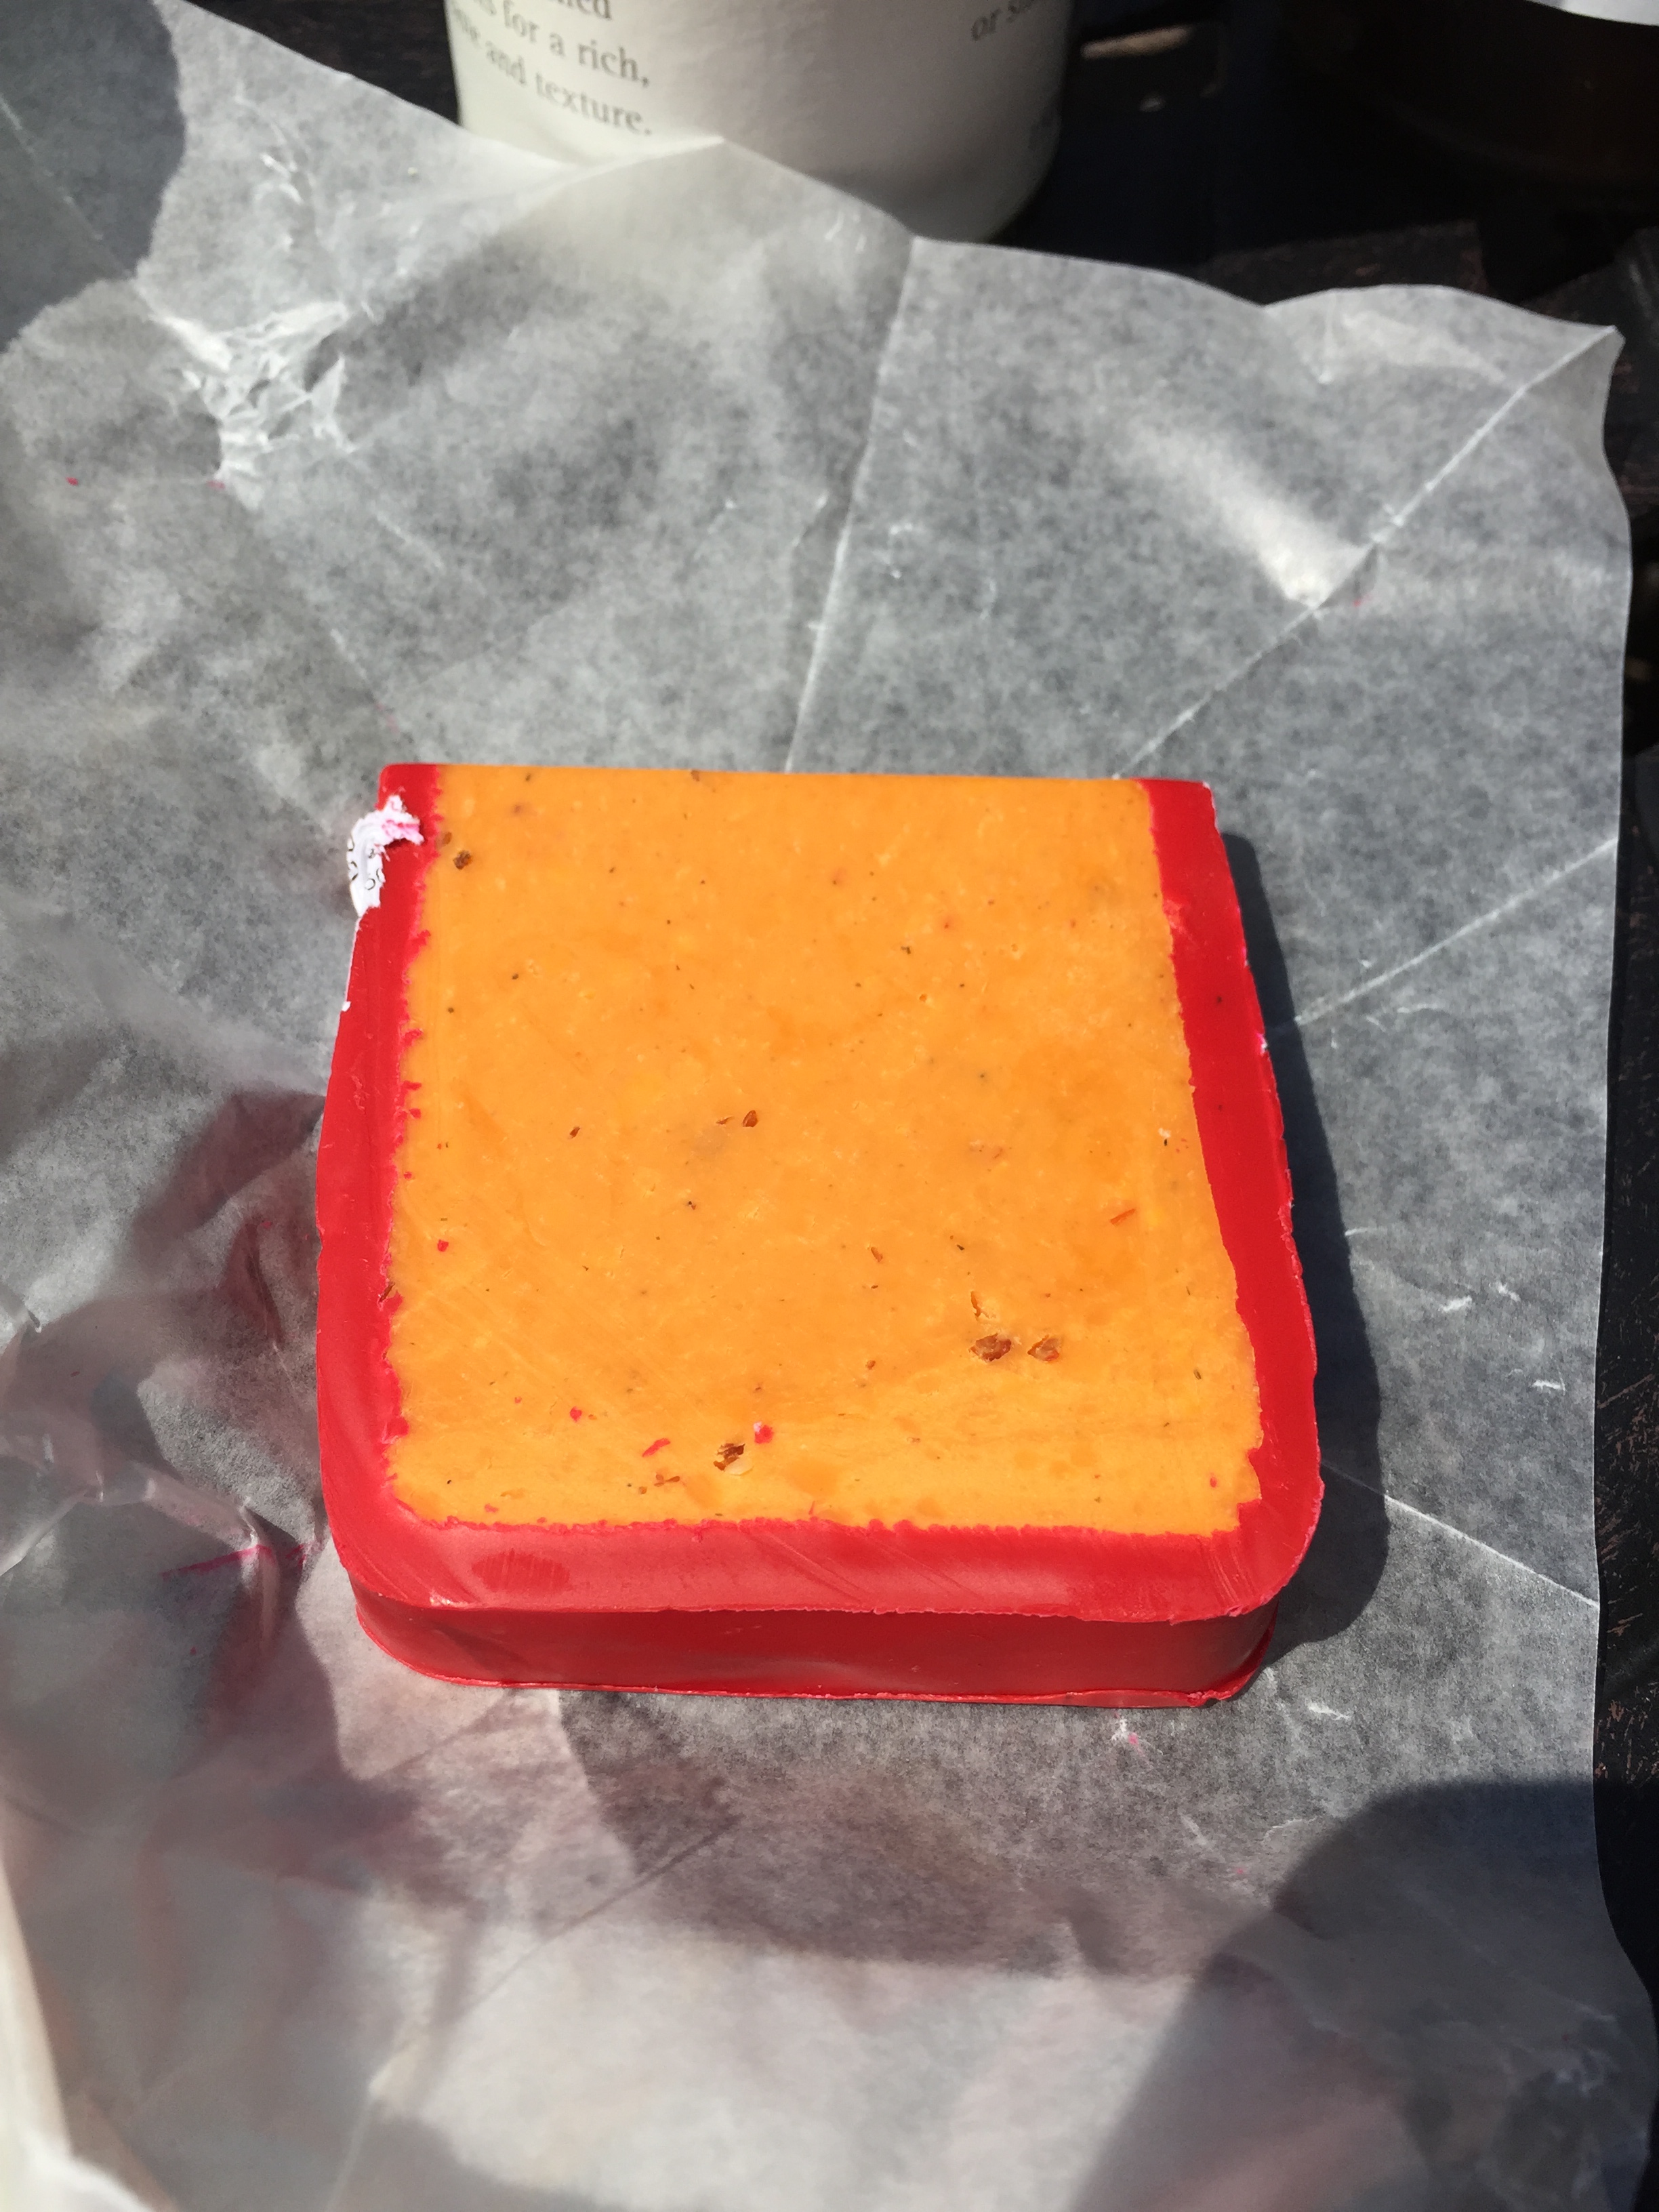 Snowdonia Cheese Company Red Devil cheese